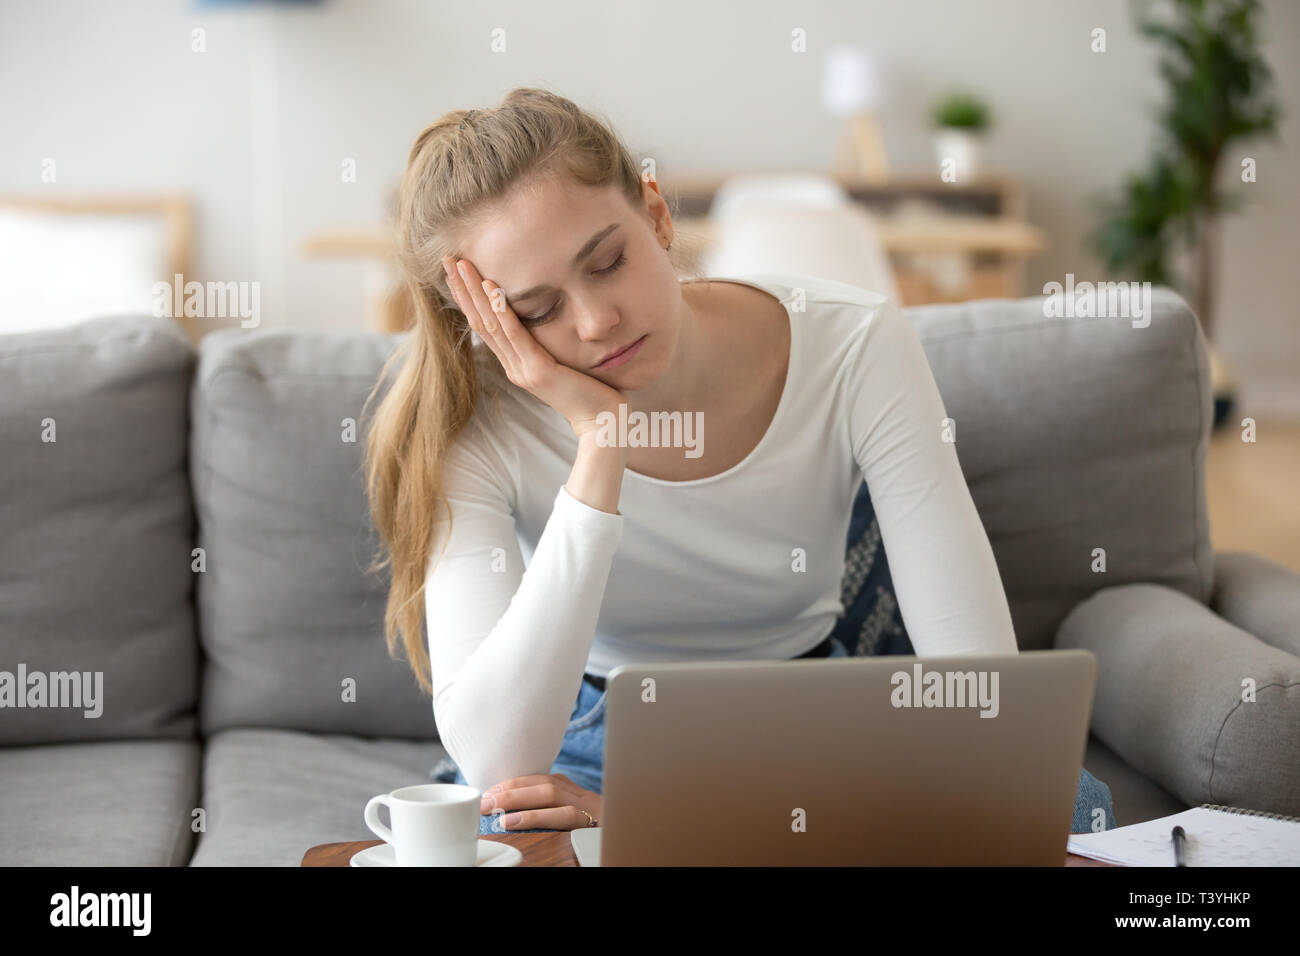 Bored sleepy woman holding head on hand, sitting with laptop Stock Photo